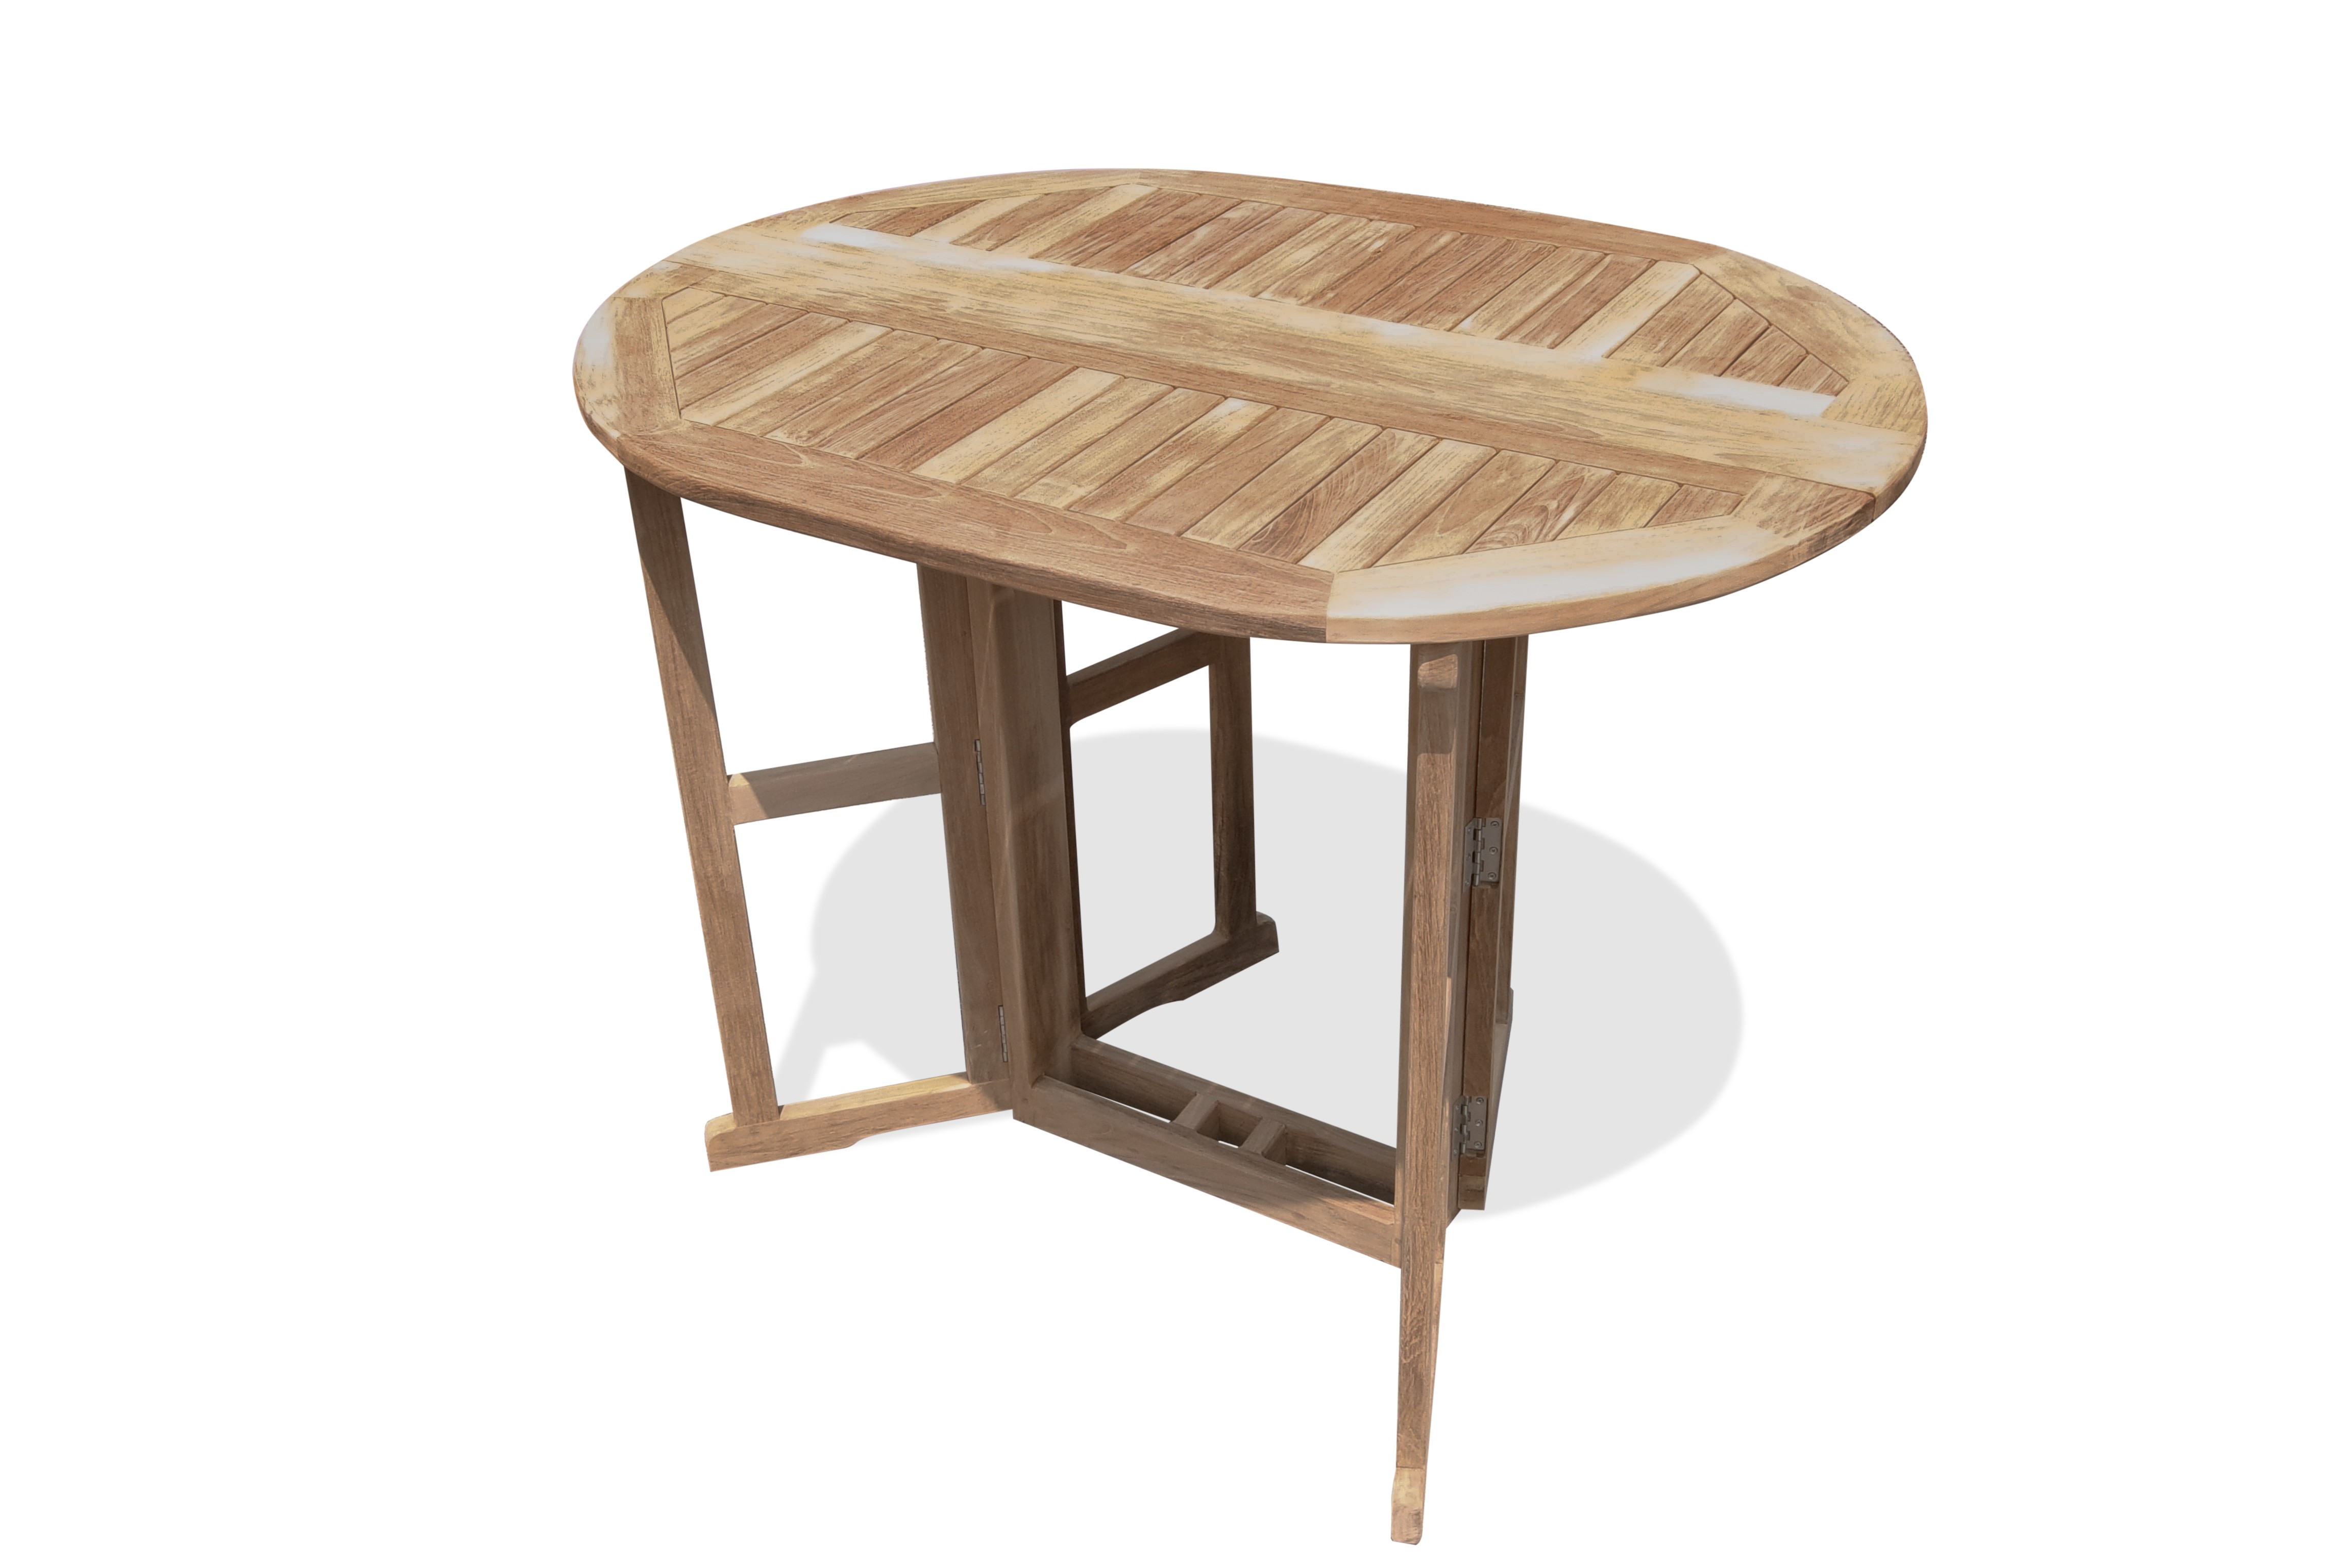  Bimini 48" x 35" Oval Drop Leaf Folding Counter Height Table...use with 1 Leaf Up or 2.... Makes 2 different tables